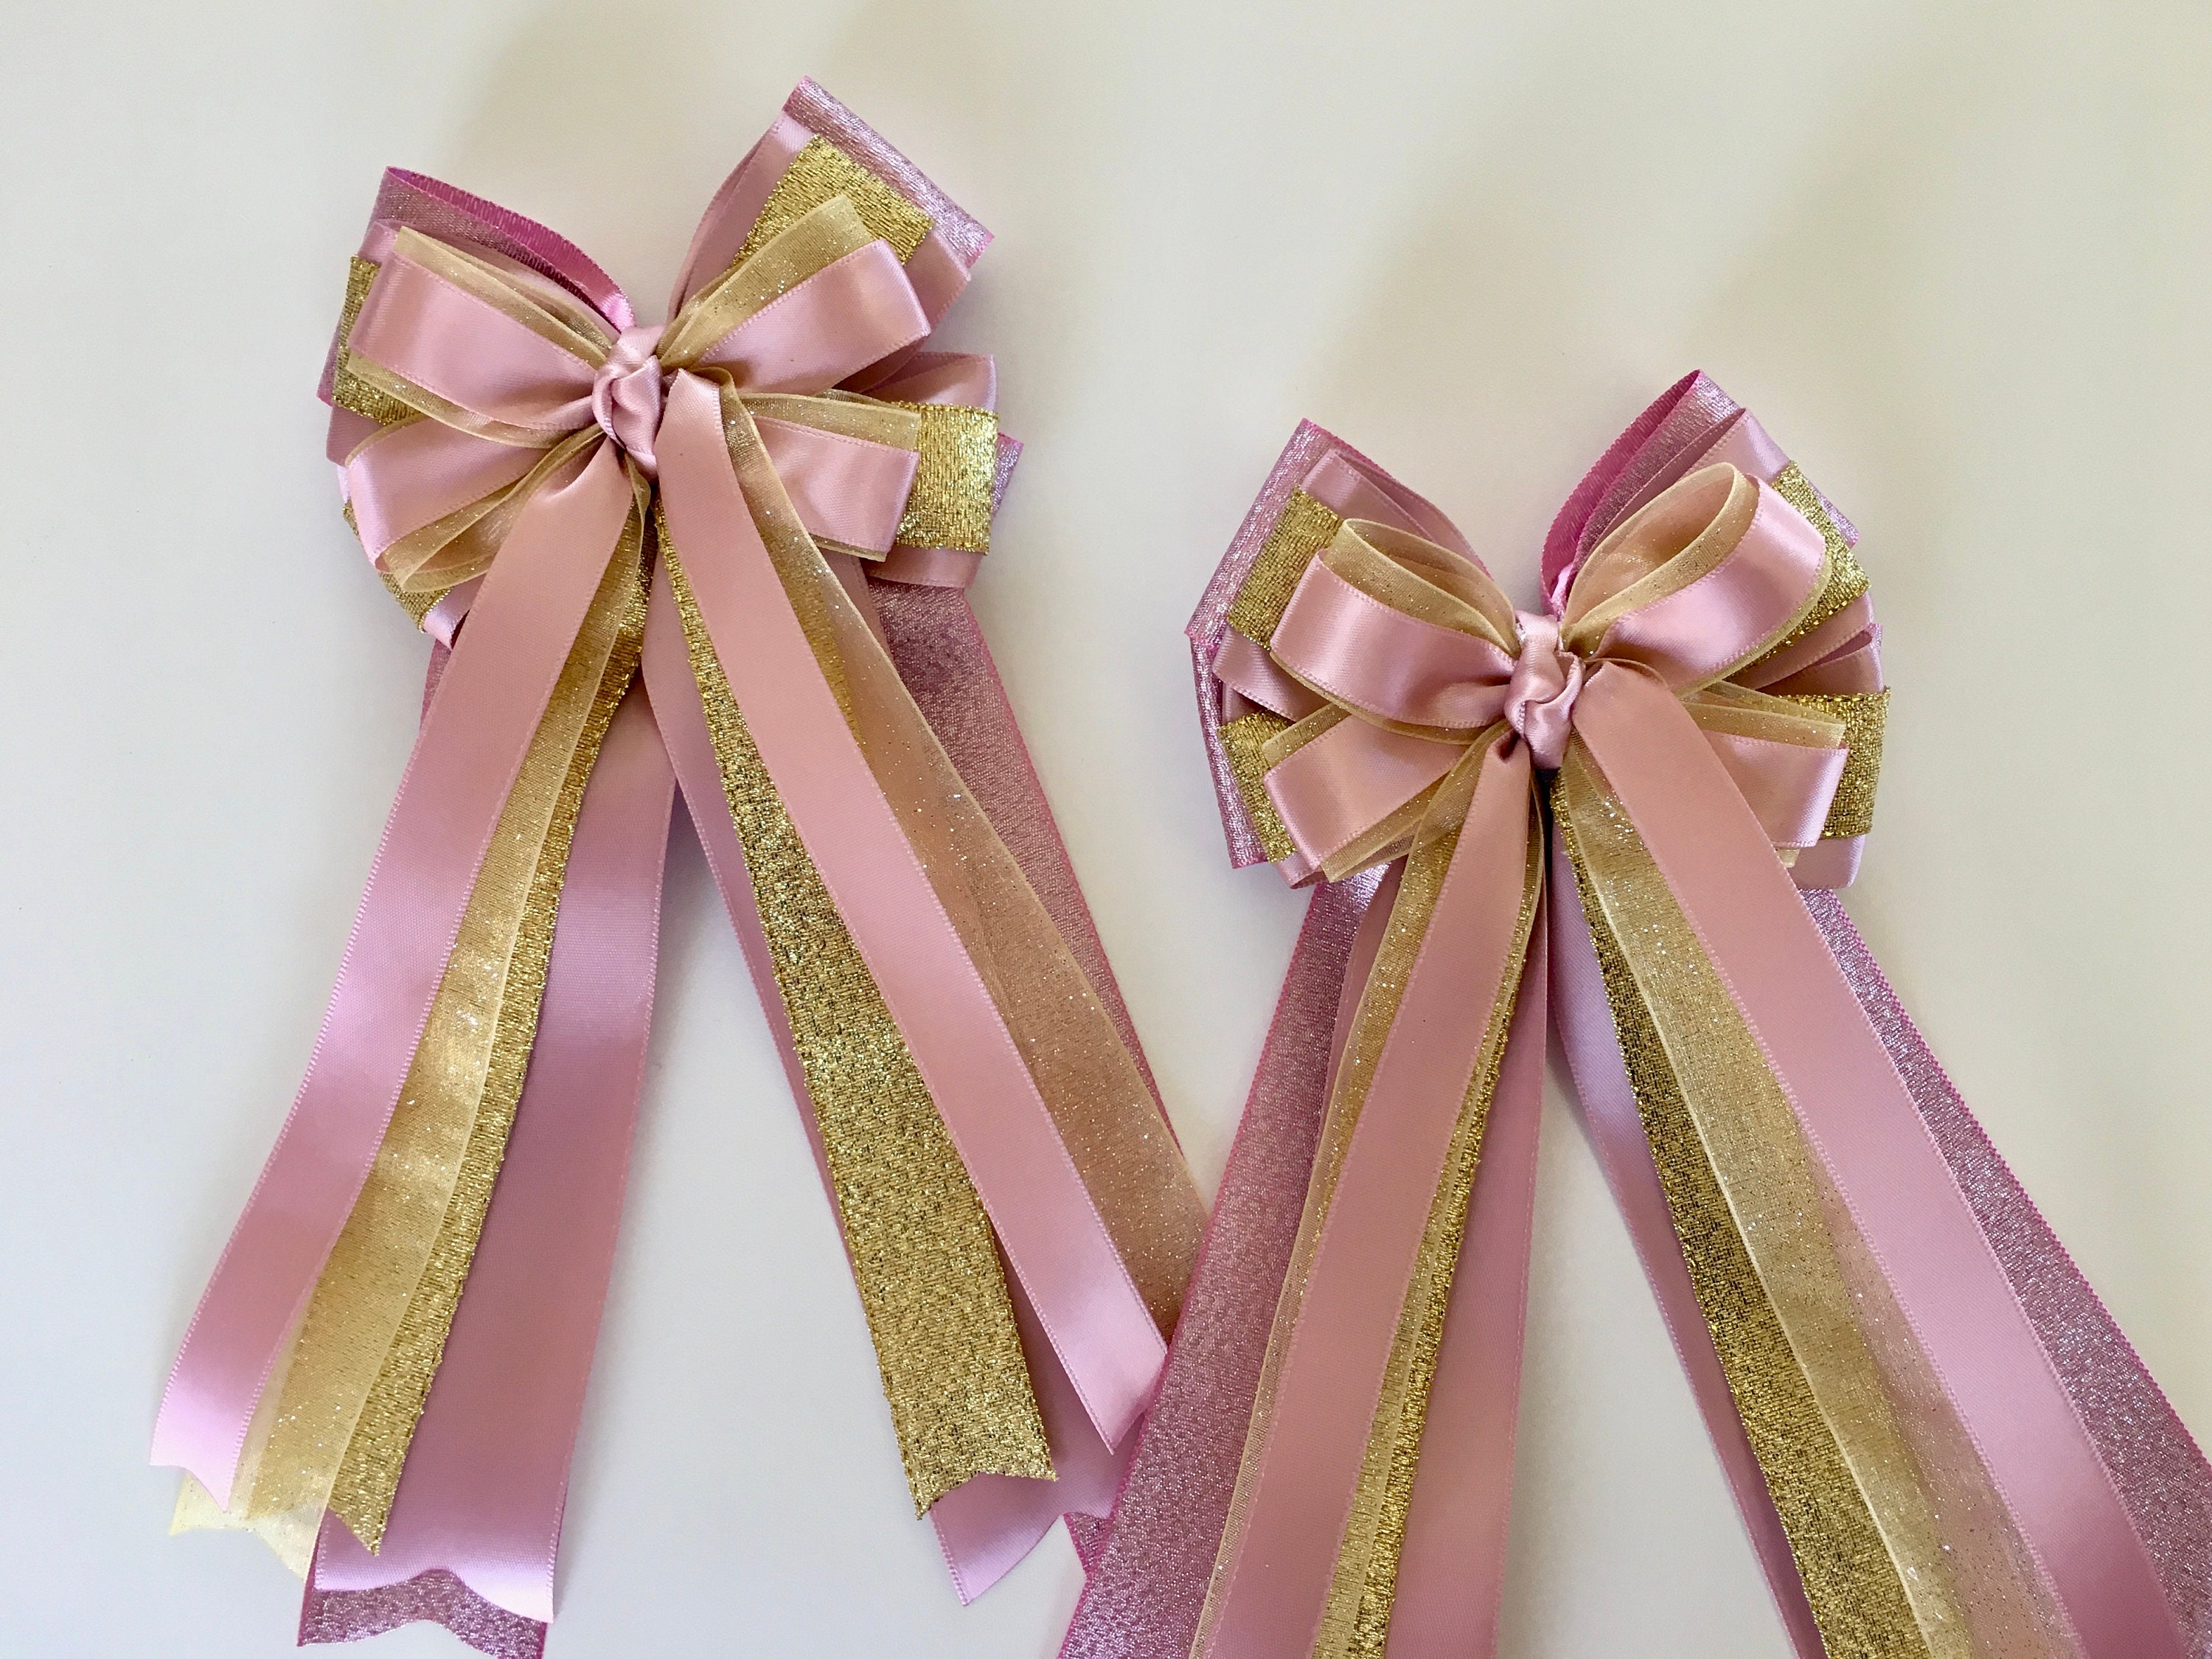 Pink, Brocade, Floral Horse Show Hair Ribbons for Girls (Floral